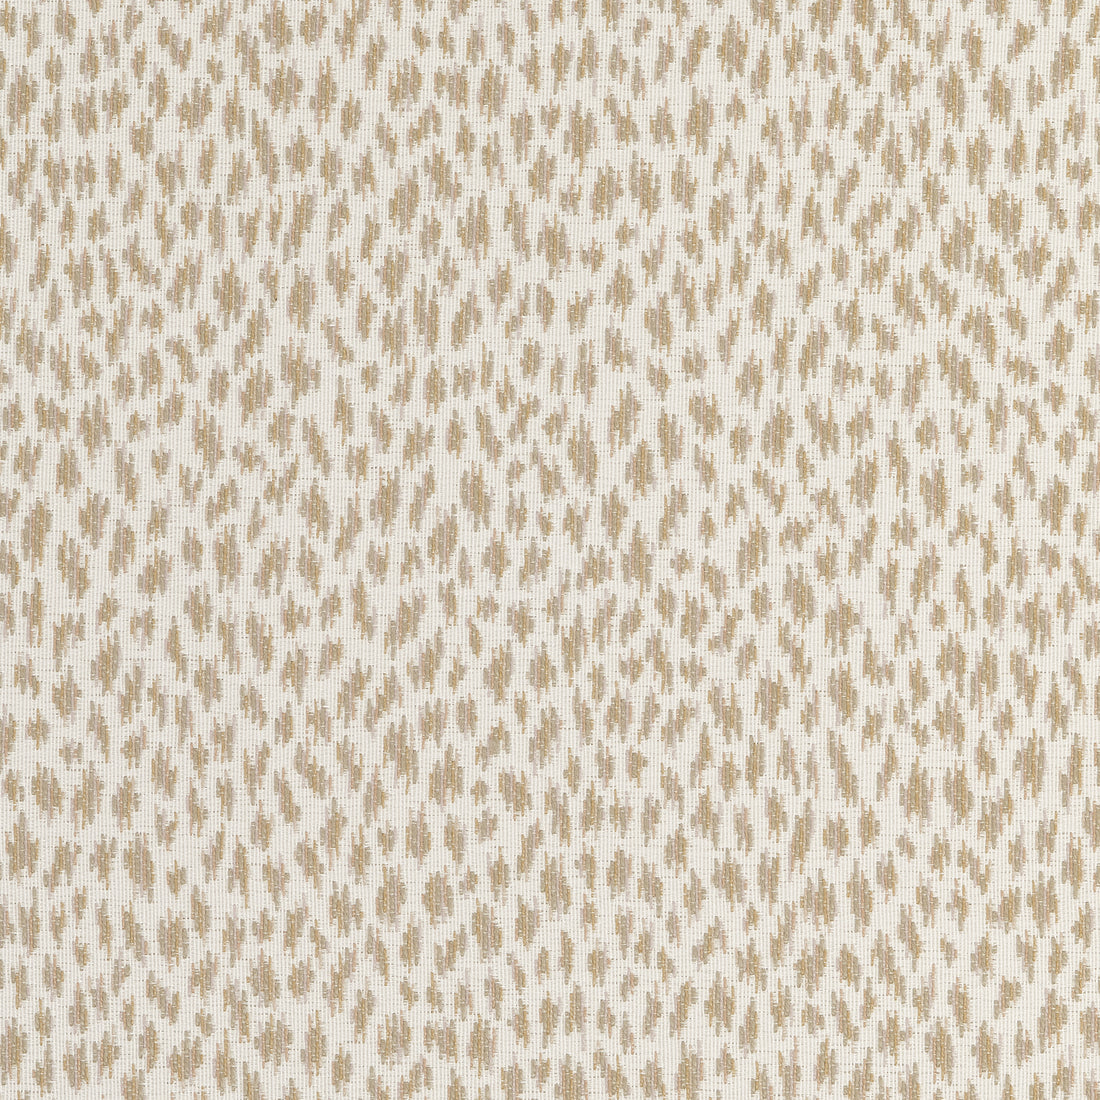 Citra fabric in linen color - pattern number W80459 - by Thibaut in the Woven Resource Vol 10 Menagerie collection